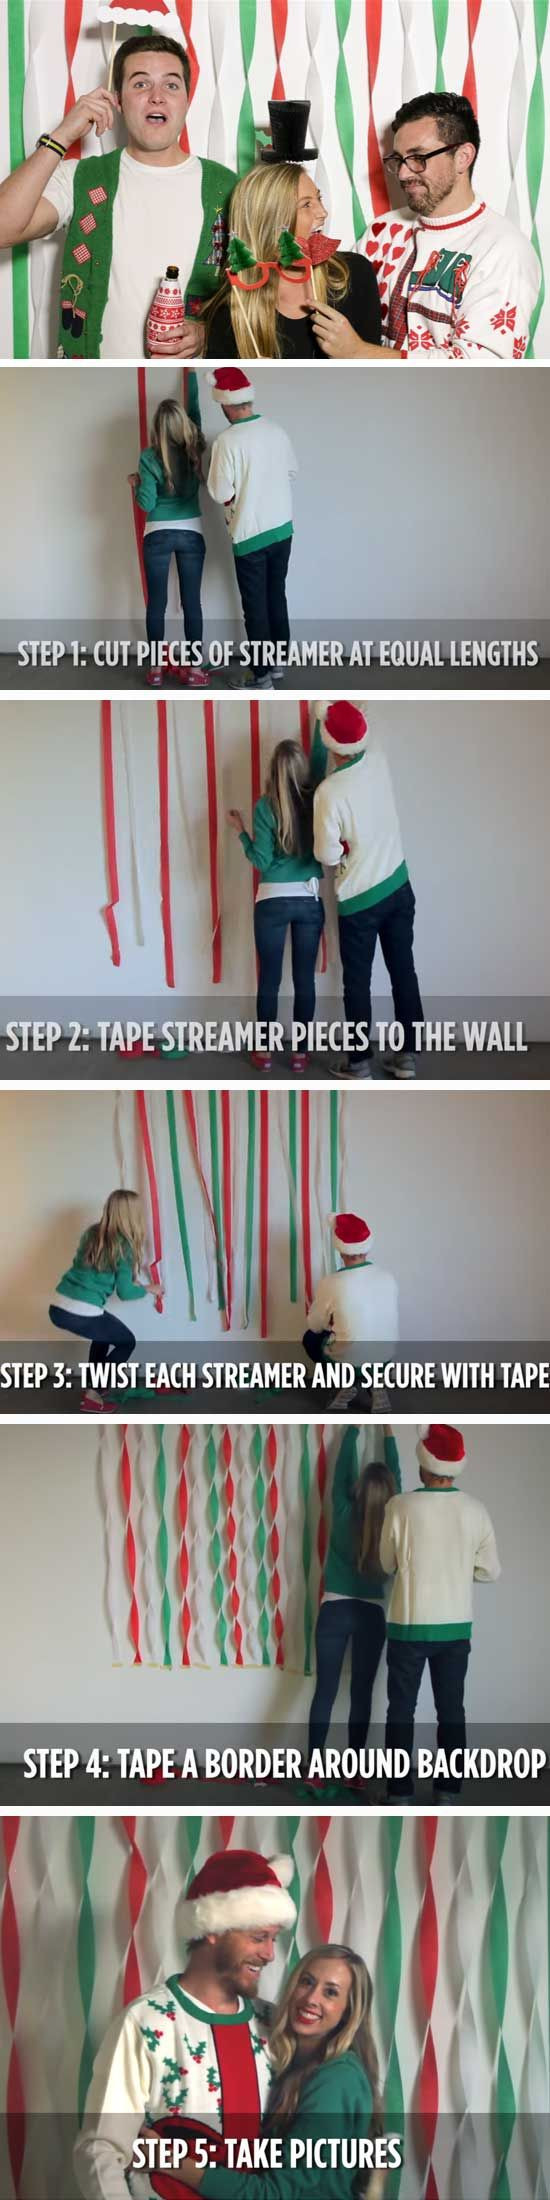 Work Christmas Party Ideas For Adults
 Best 20 Ugly Sweater Party ideas on Pinterest